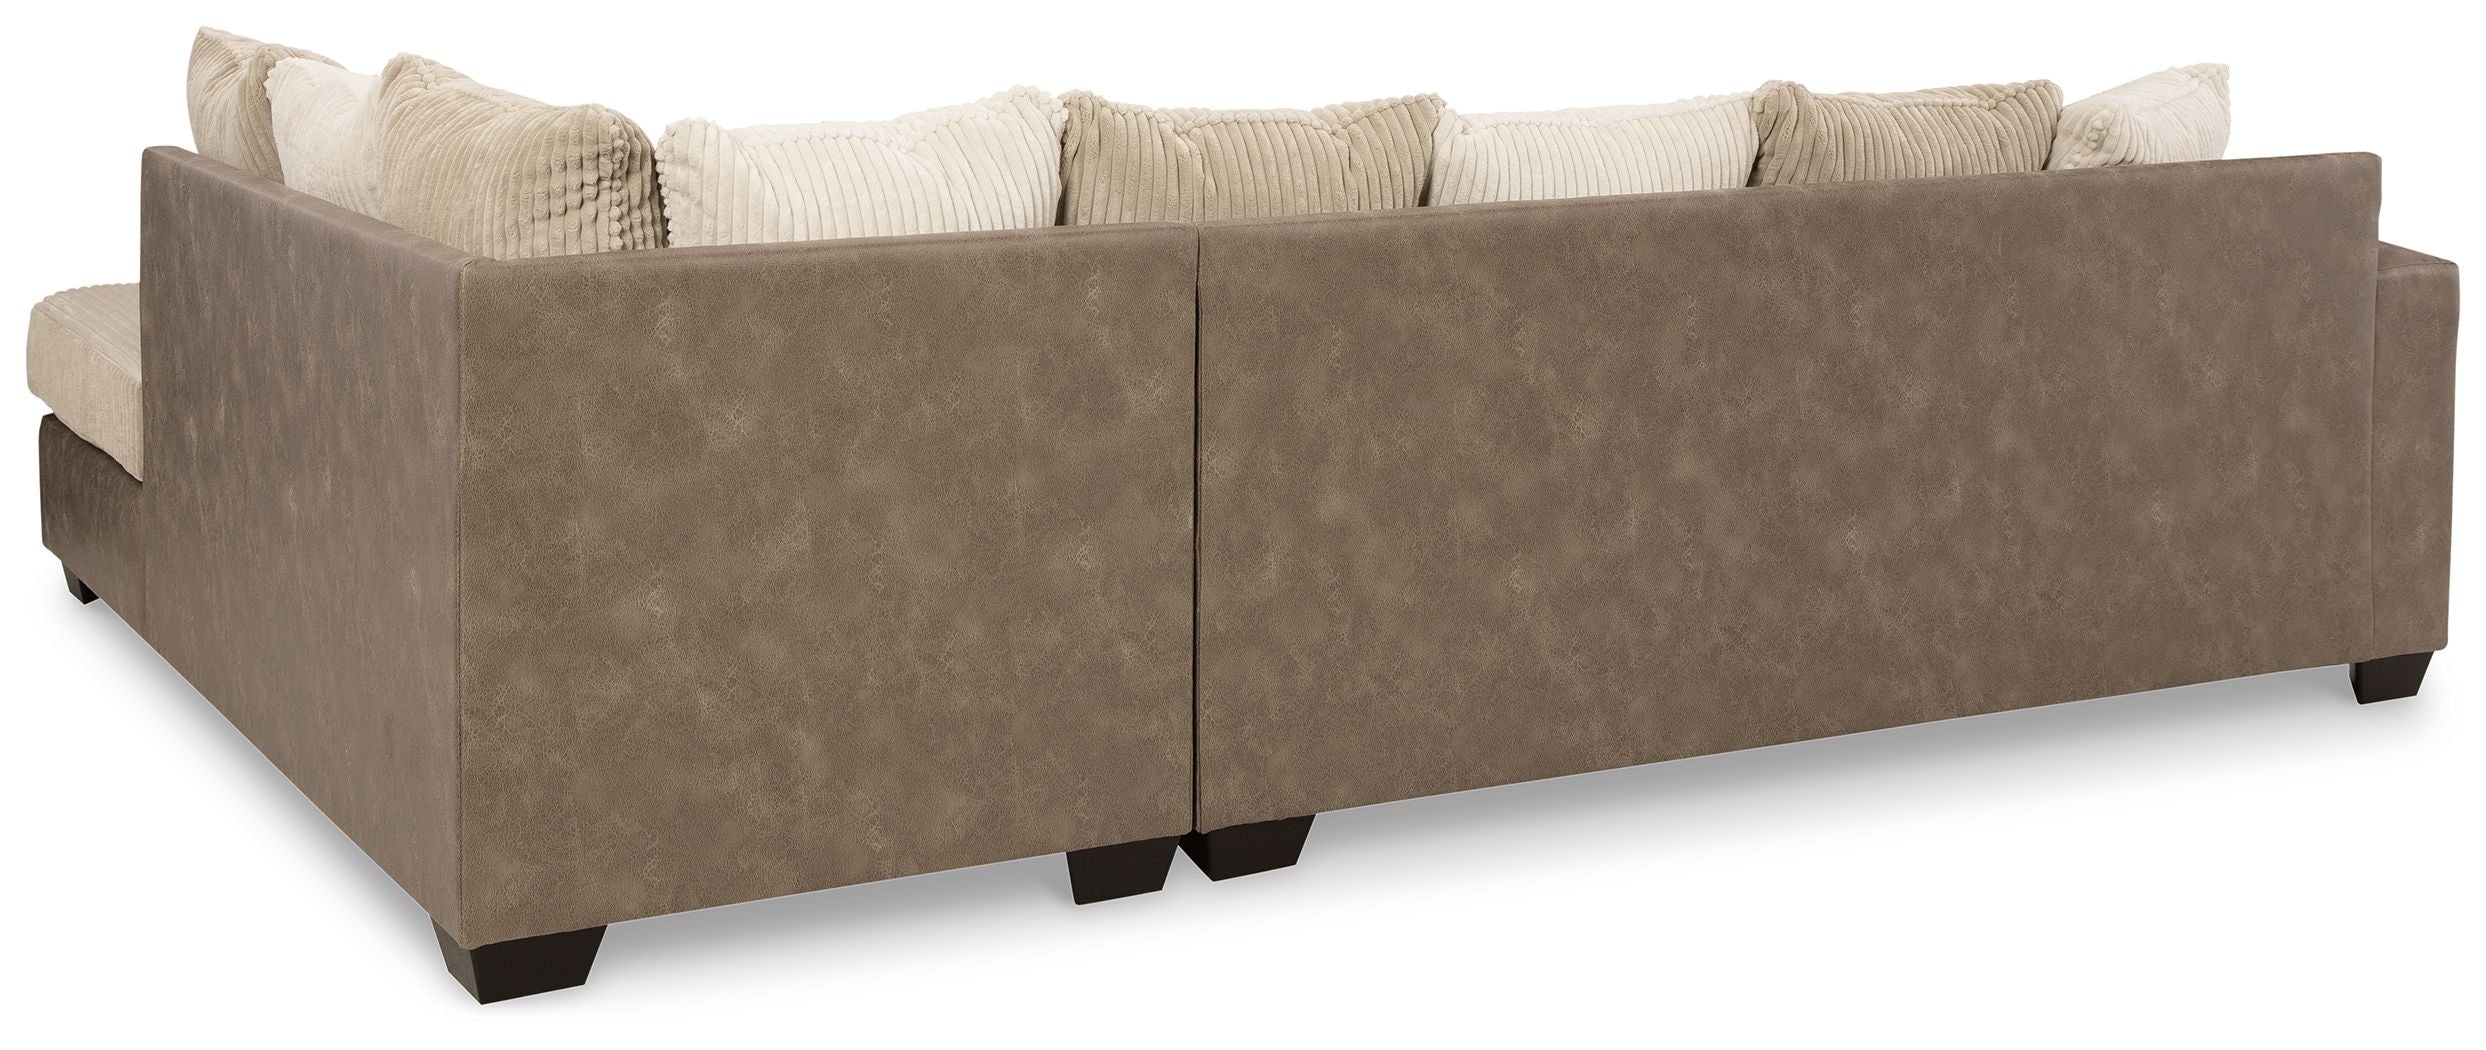 Keskin Brown Corduroy L Shaped Sectional-Stationary Sectionals-American Furniture Outlet